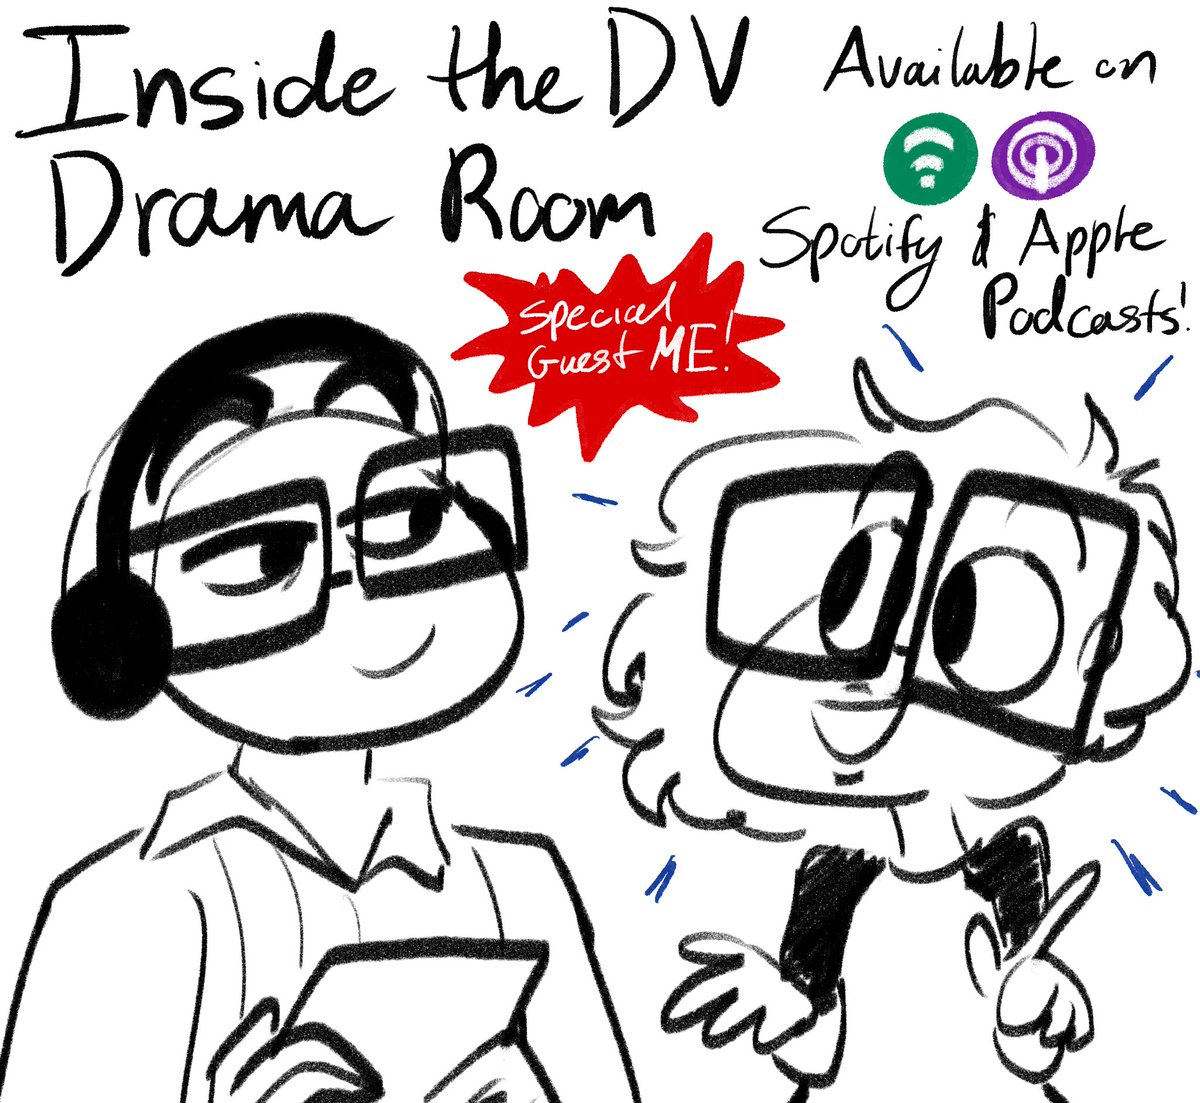 hey!!!! I did a podcast with @dvhsdrama that went up today! it’s available on Spotify and Apple Podcasts! Just look up Inside the DV Drama Room—it’s the latest episode!!!

ON SPOTIFY: open.spotify.com/episode/1PdiHl…

#podcast #theaterpodcast